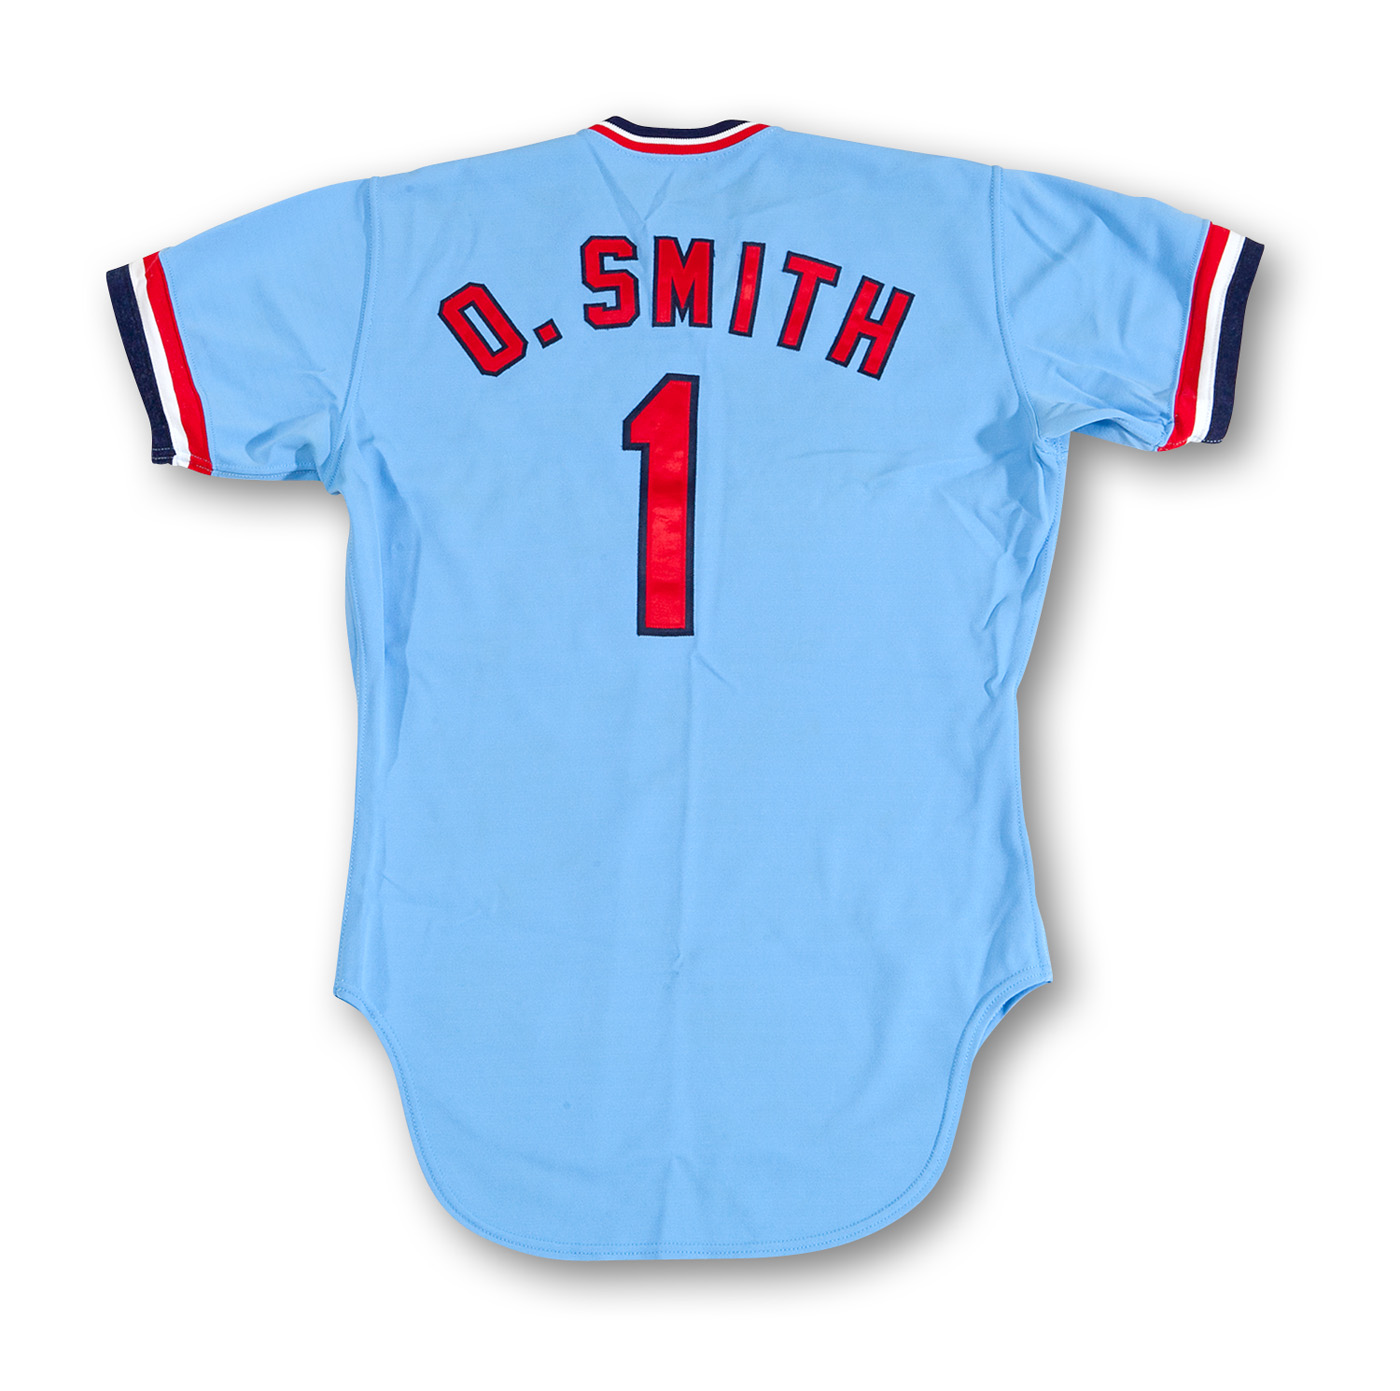 St. Louis Cardinals jersey worn by Hall of Famer Ozzie Smith. In a